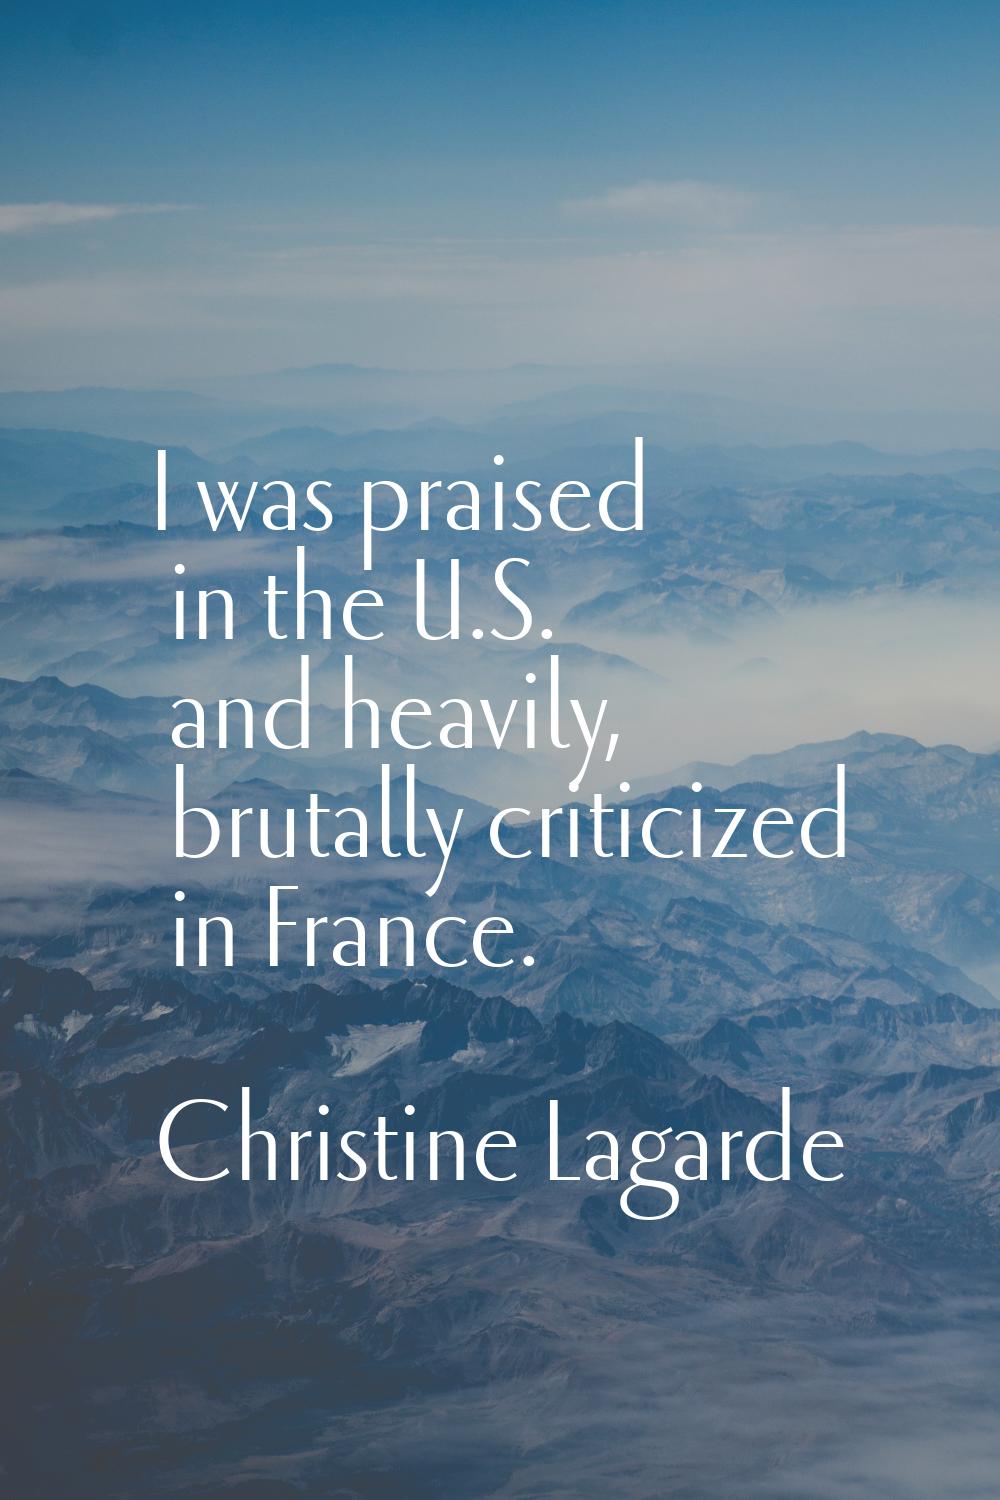 I was praised in the U.S. and heavily, brutally criticized in France.